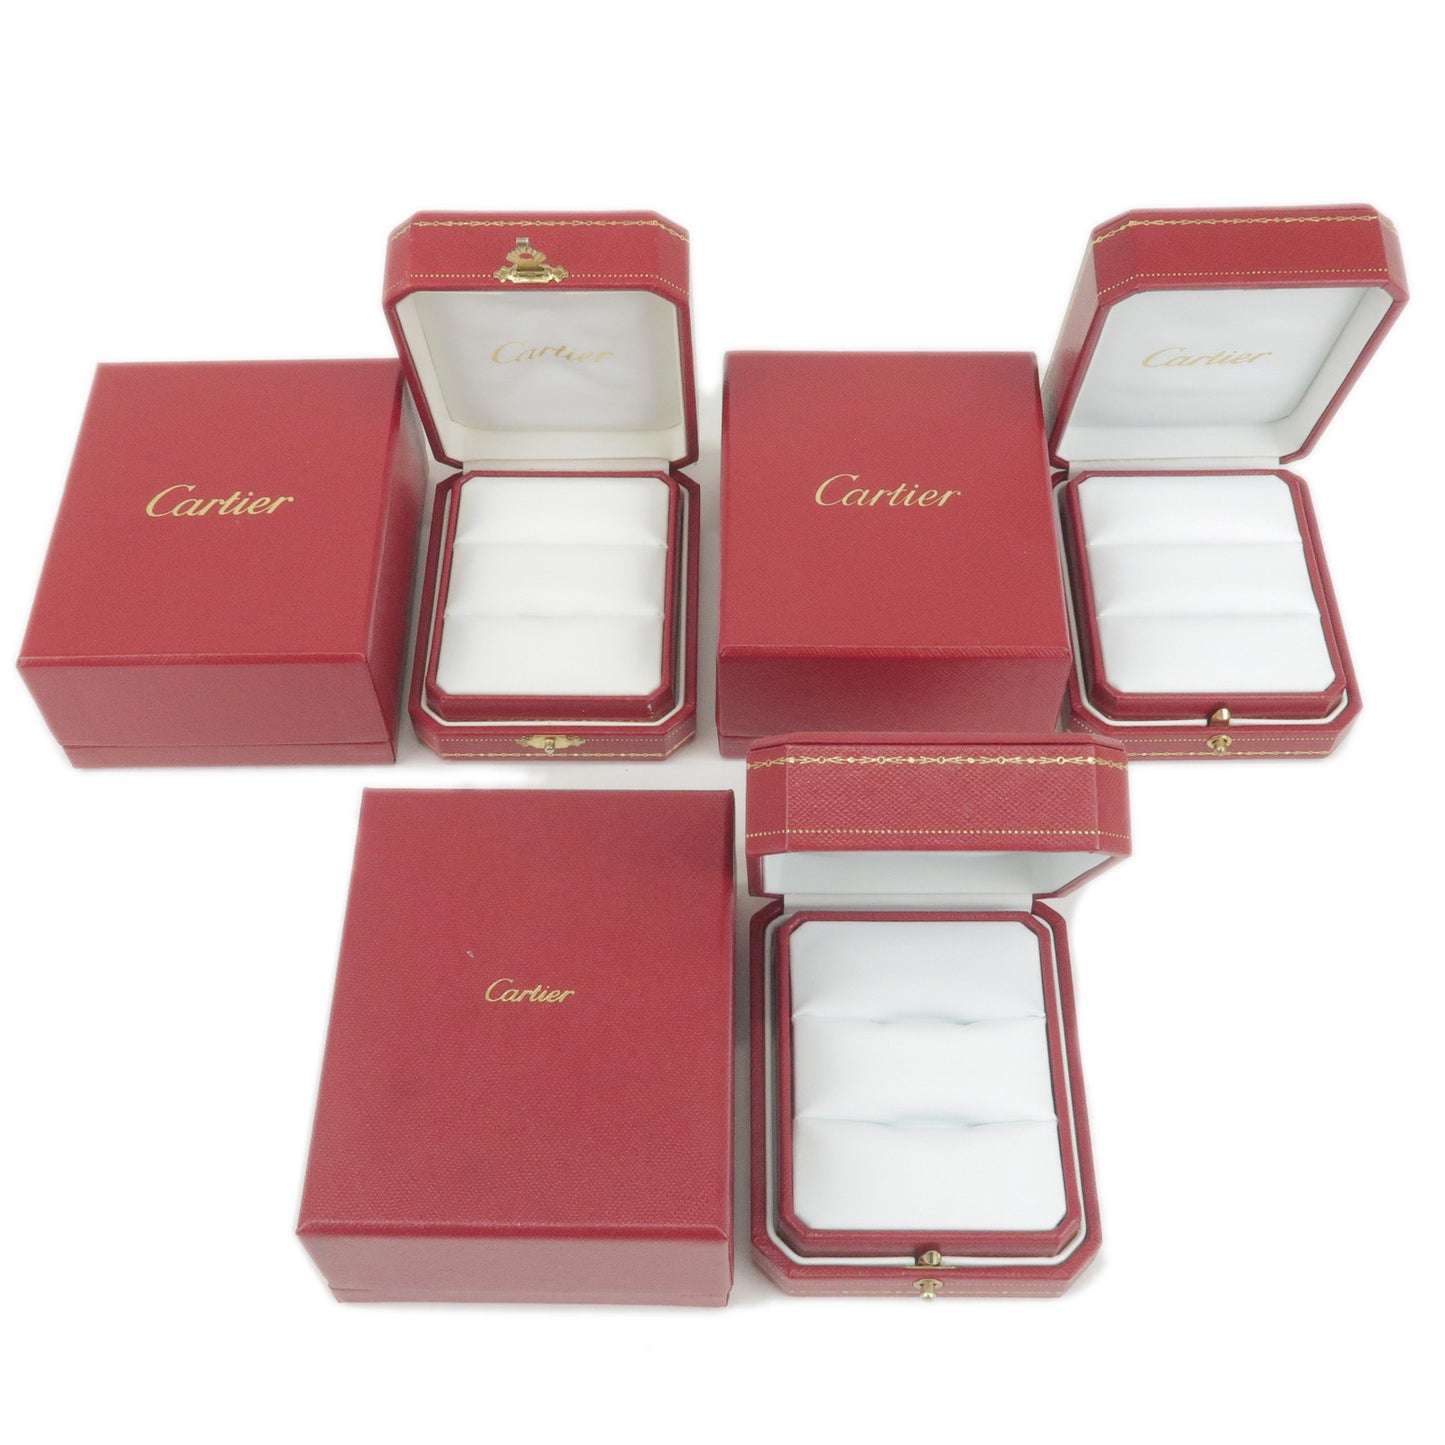 Cartier-Set-of-3-Pairs-Ring-Box-Jewelry-Box-For-Ring-Red